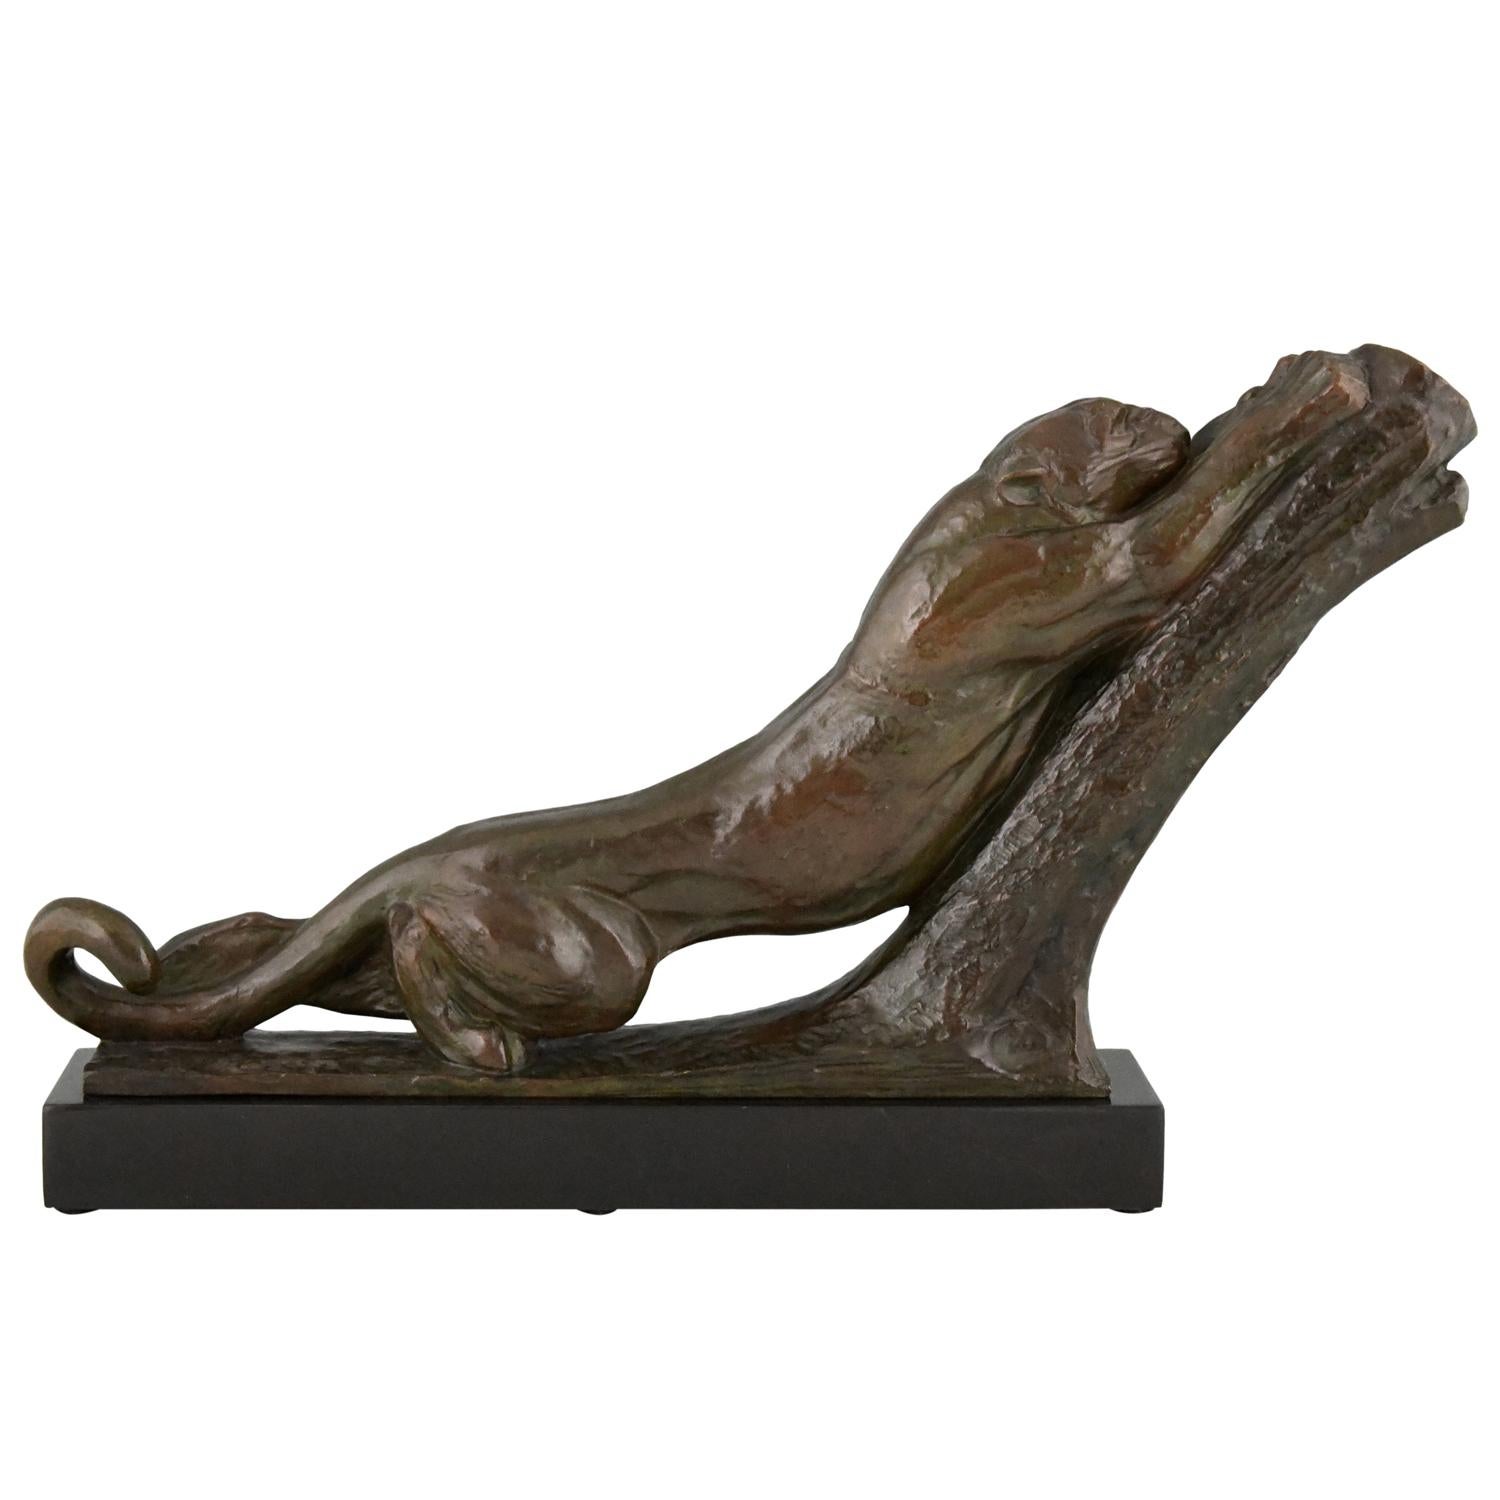 Spectacular Art Deco bronze of a panther strechting. 
By the well known French sculptur Andre Vincent Bequerel.
The bronze has a beautiful patina and stands on a Belgian black marble base. 
Signed and with the Les Neveux de Lehmann foundry